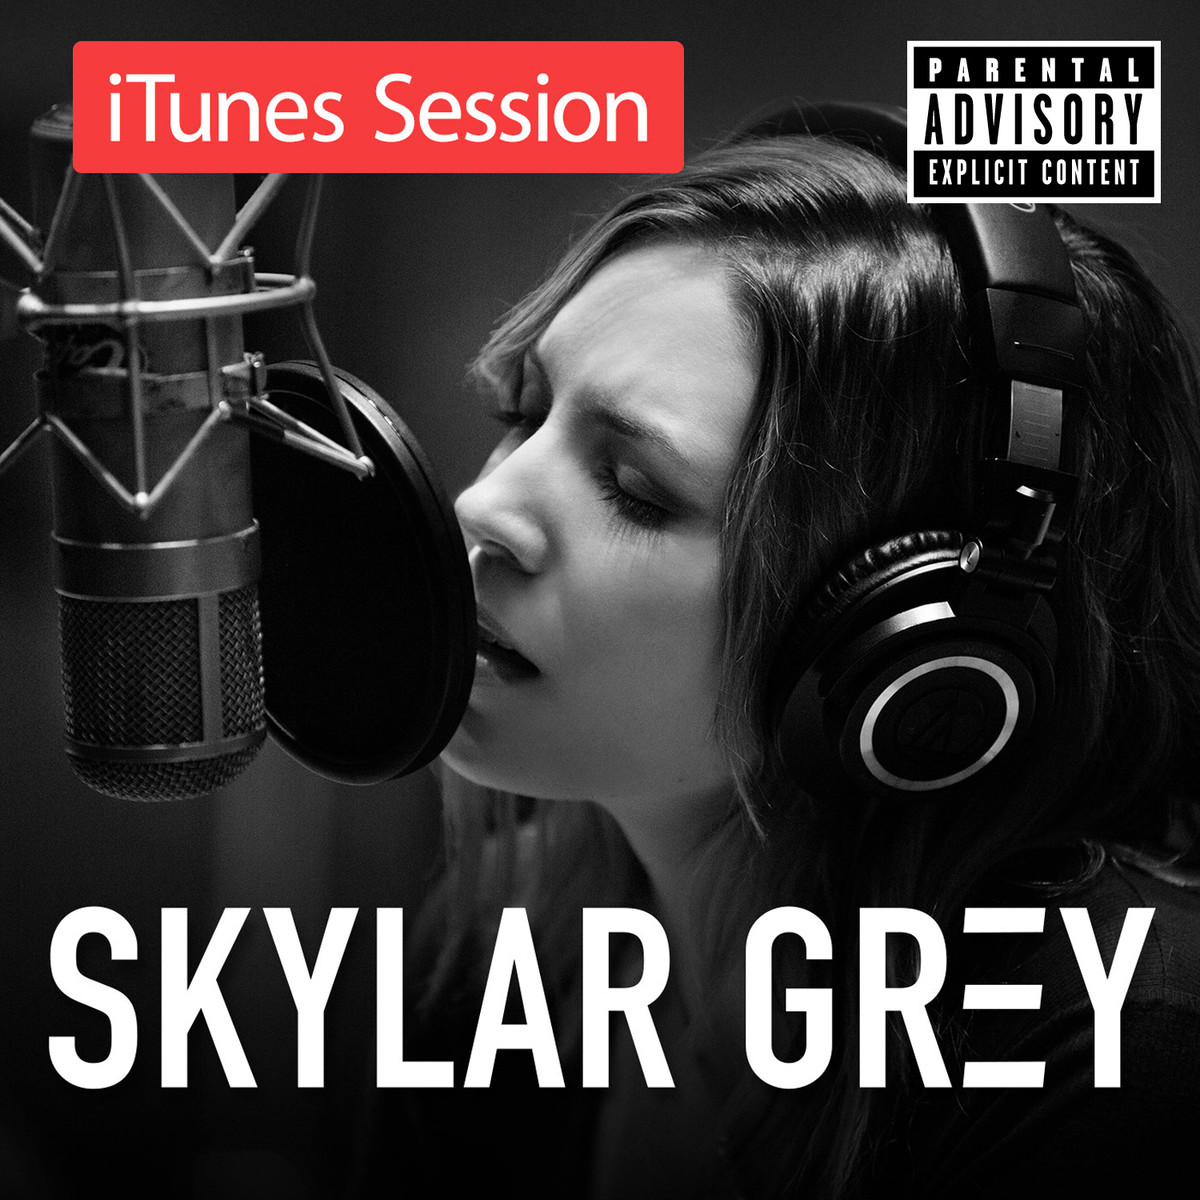 Skylar Grey image and pictorial